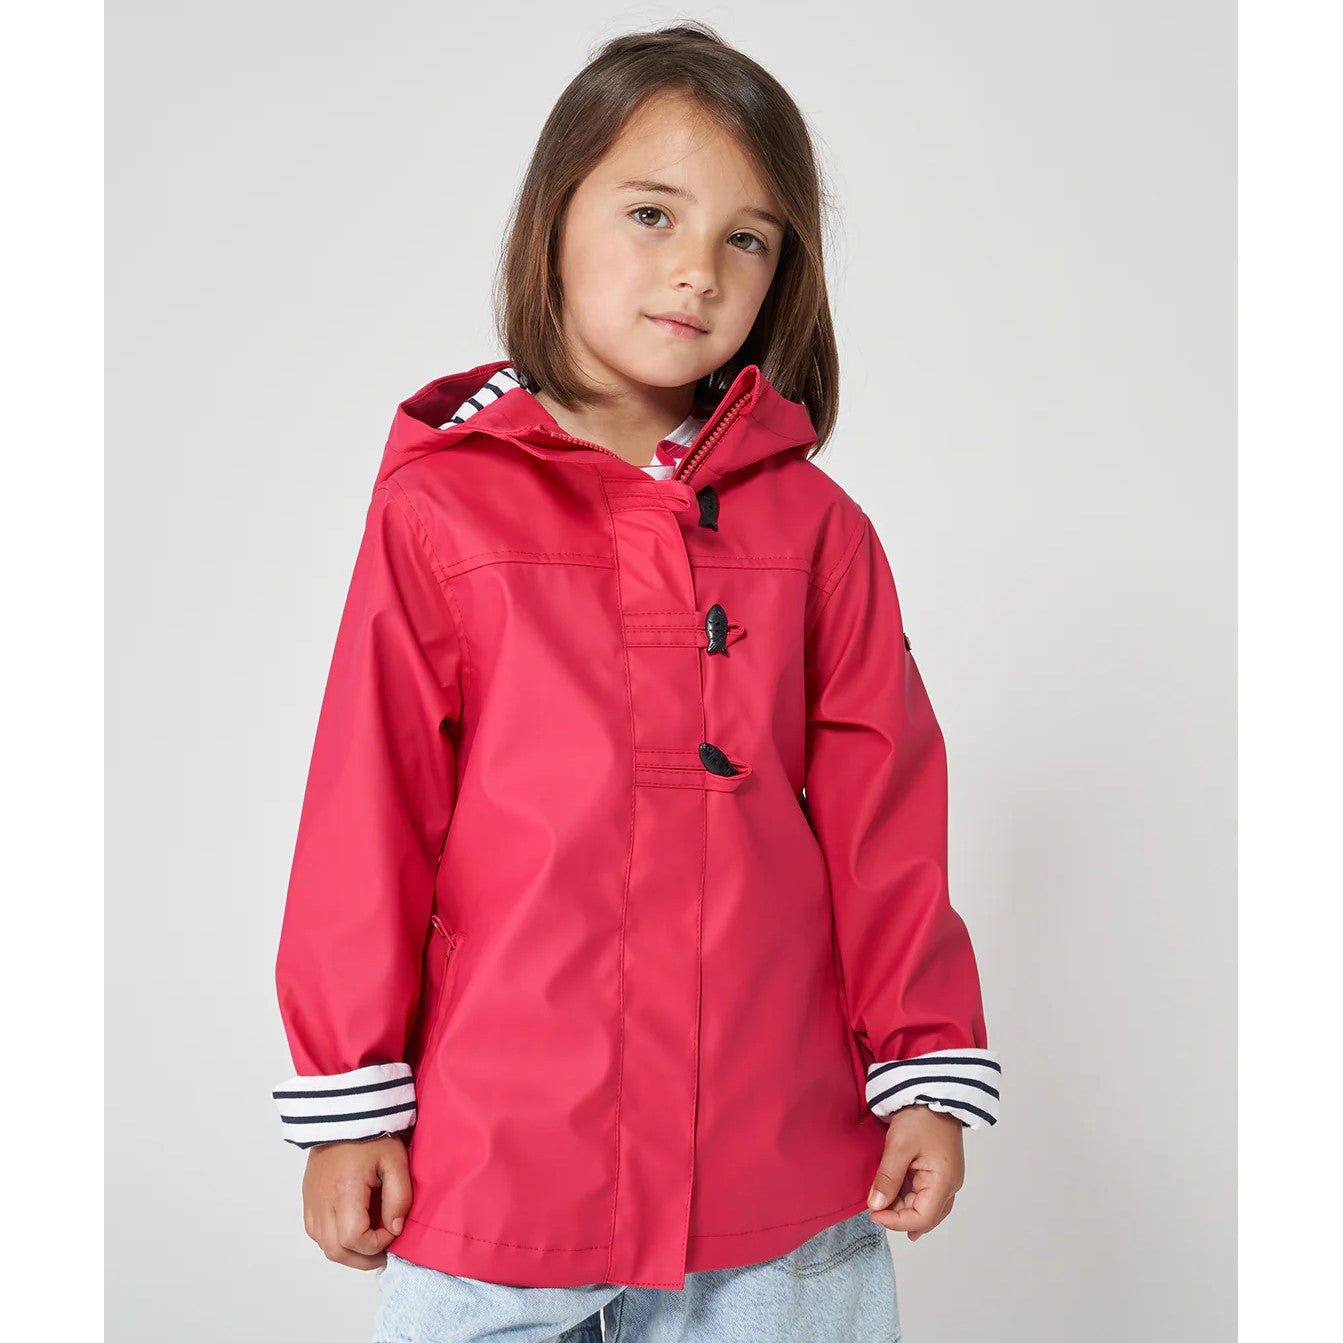 Sailor Raincoat with Striped Lining for Youth